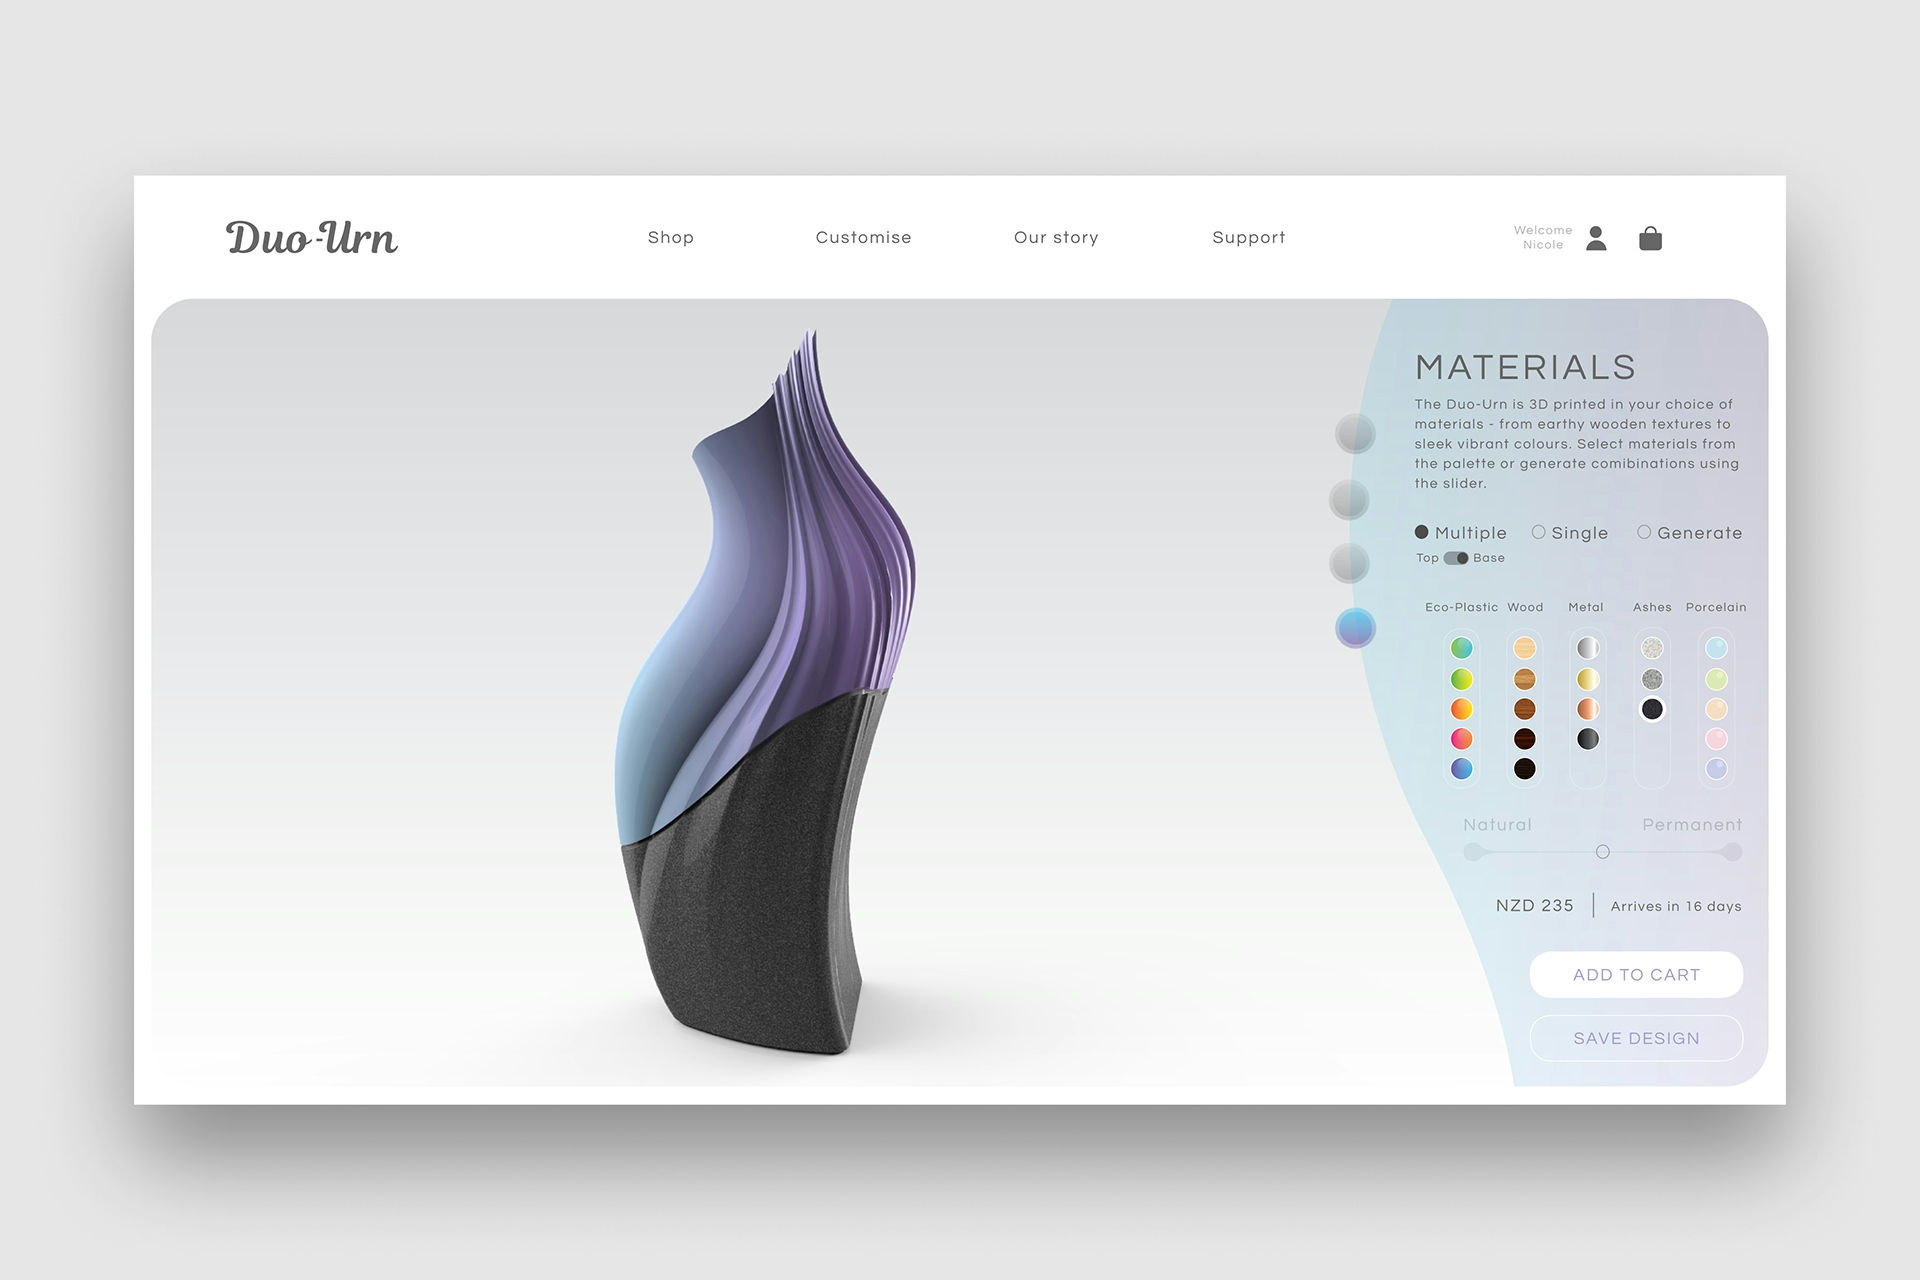 Mockup of website app where users can customise their urn.